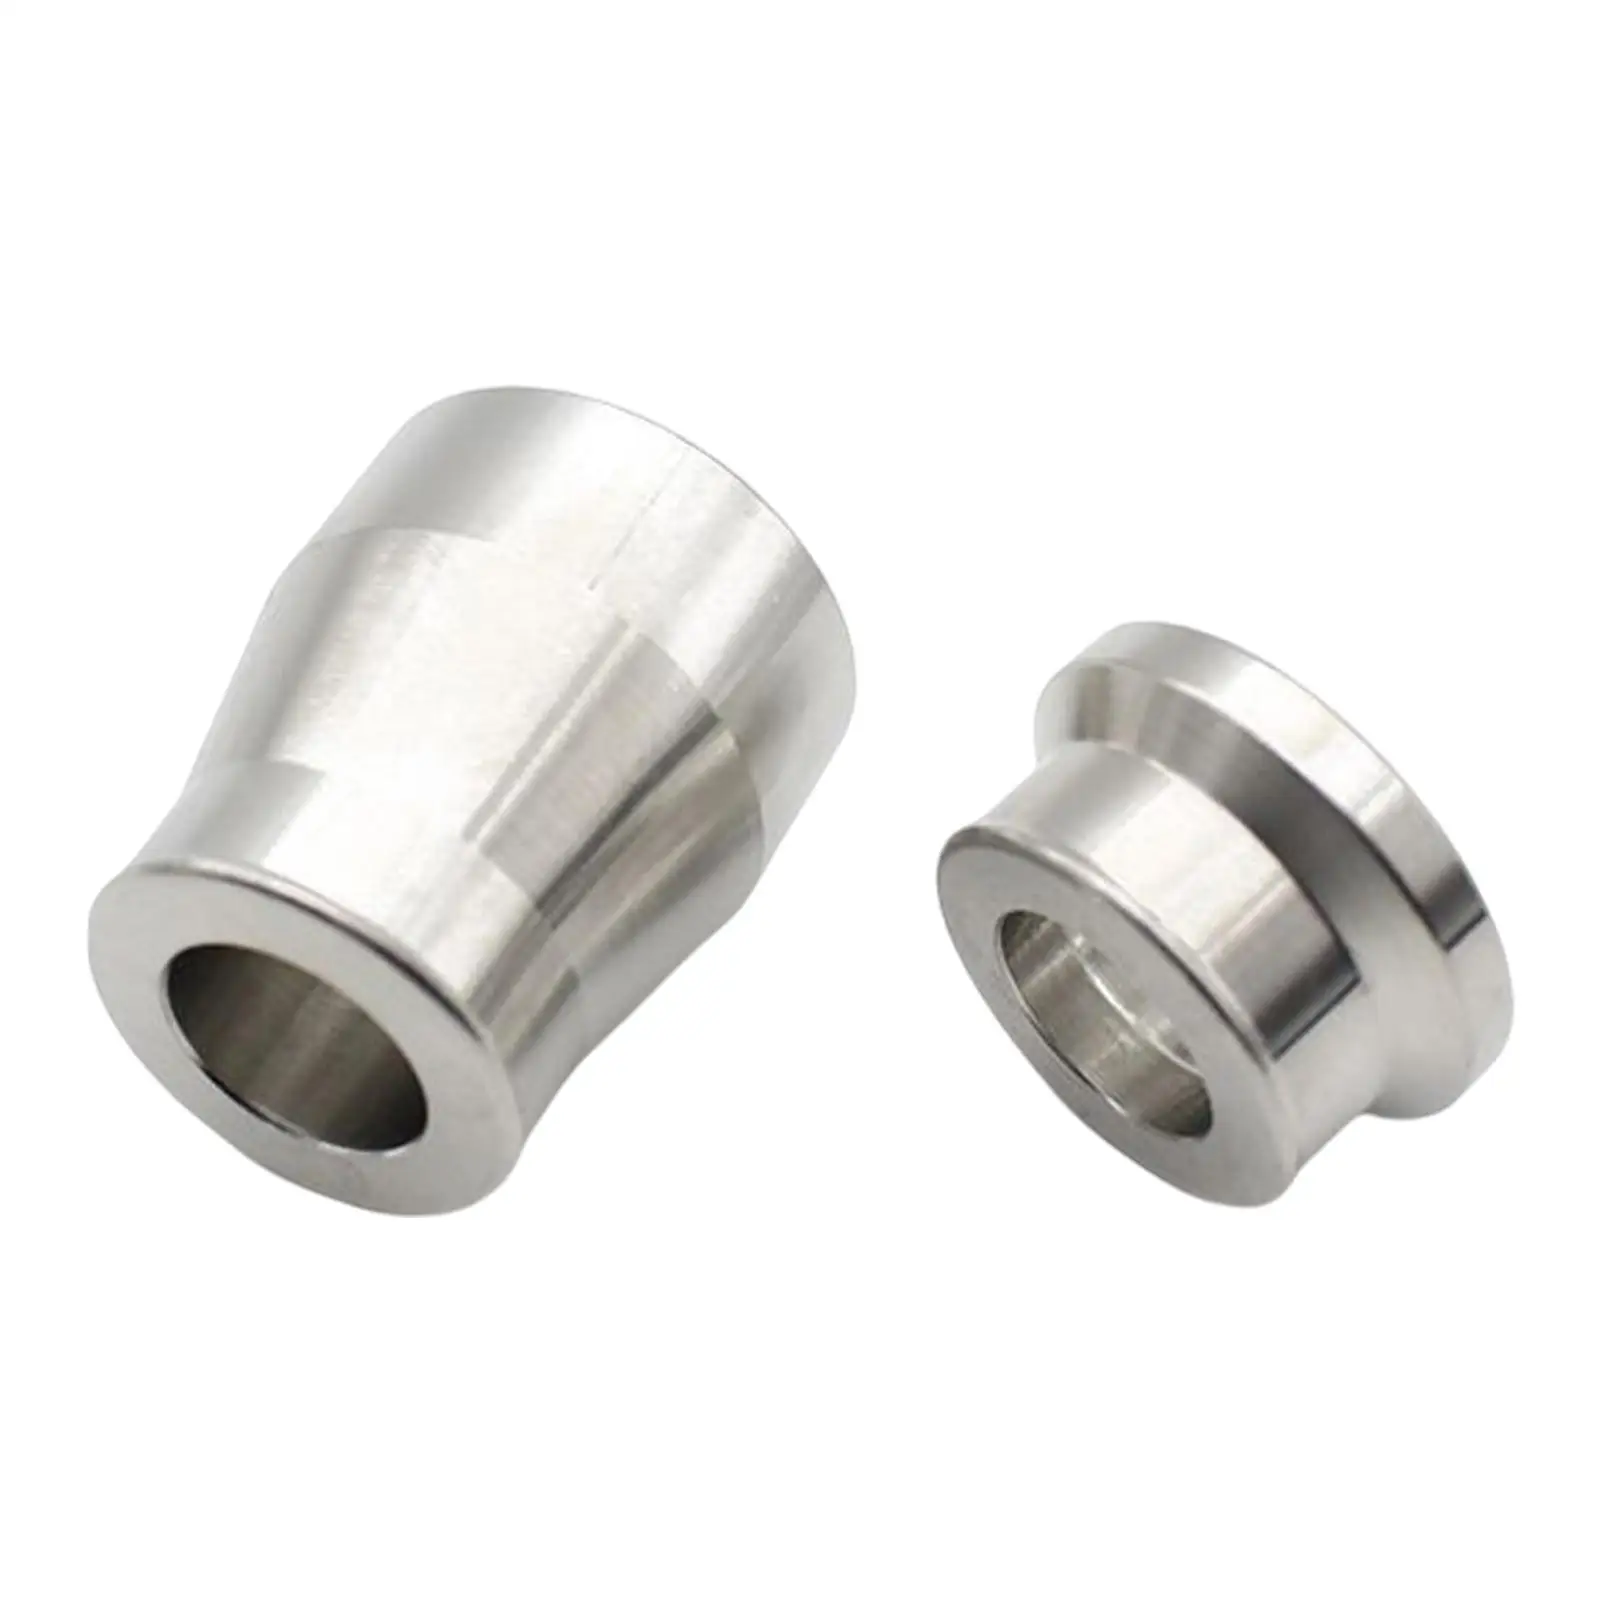 Bearings Hardened Reinforced Bushings Autocycle Durable Motorcycle Parts